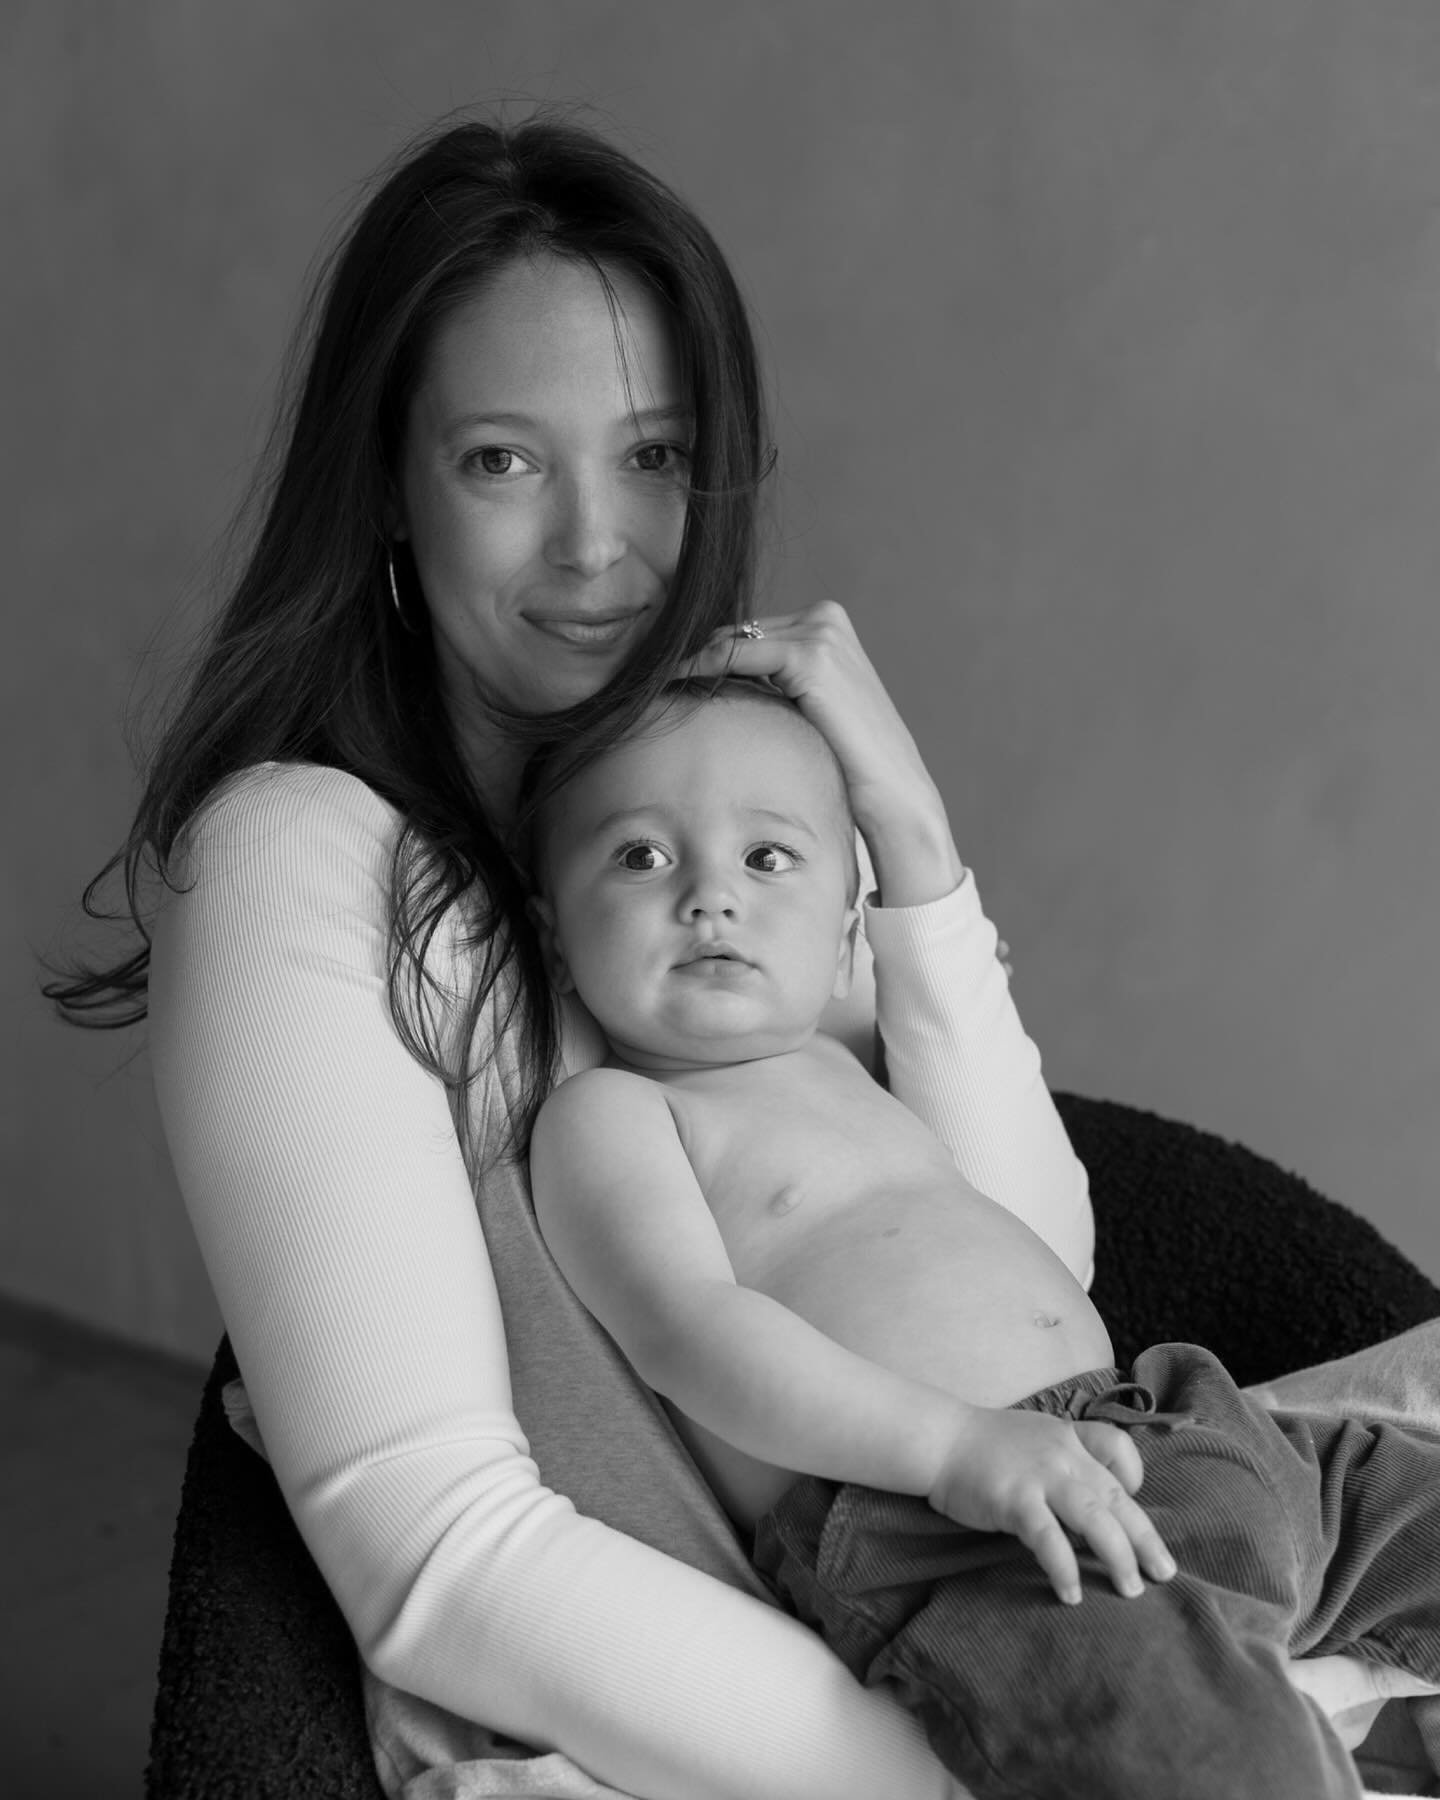 five black and white frames of this gorgeous mama and her son at my studio minis 🤍 capturing you with your babies is one of my greatest joys&mdash;hope you&rsquo;re all feeling loved and celebrated this weekend!